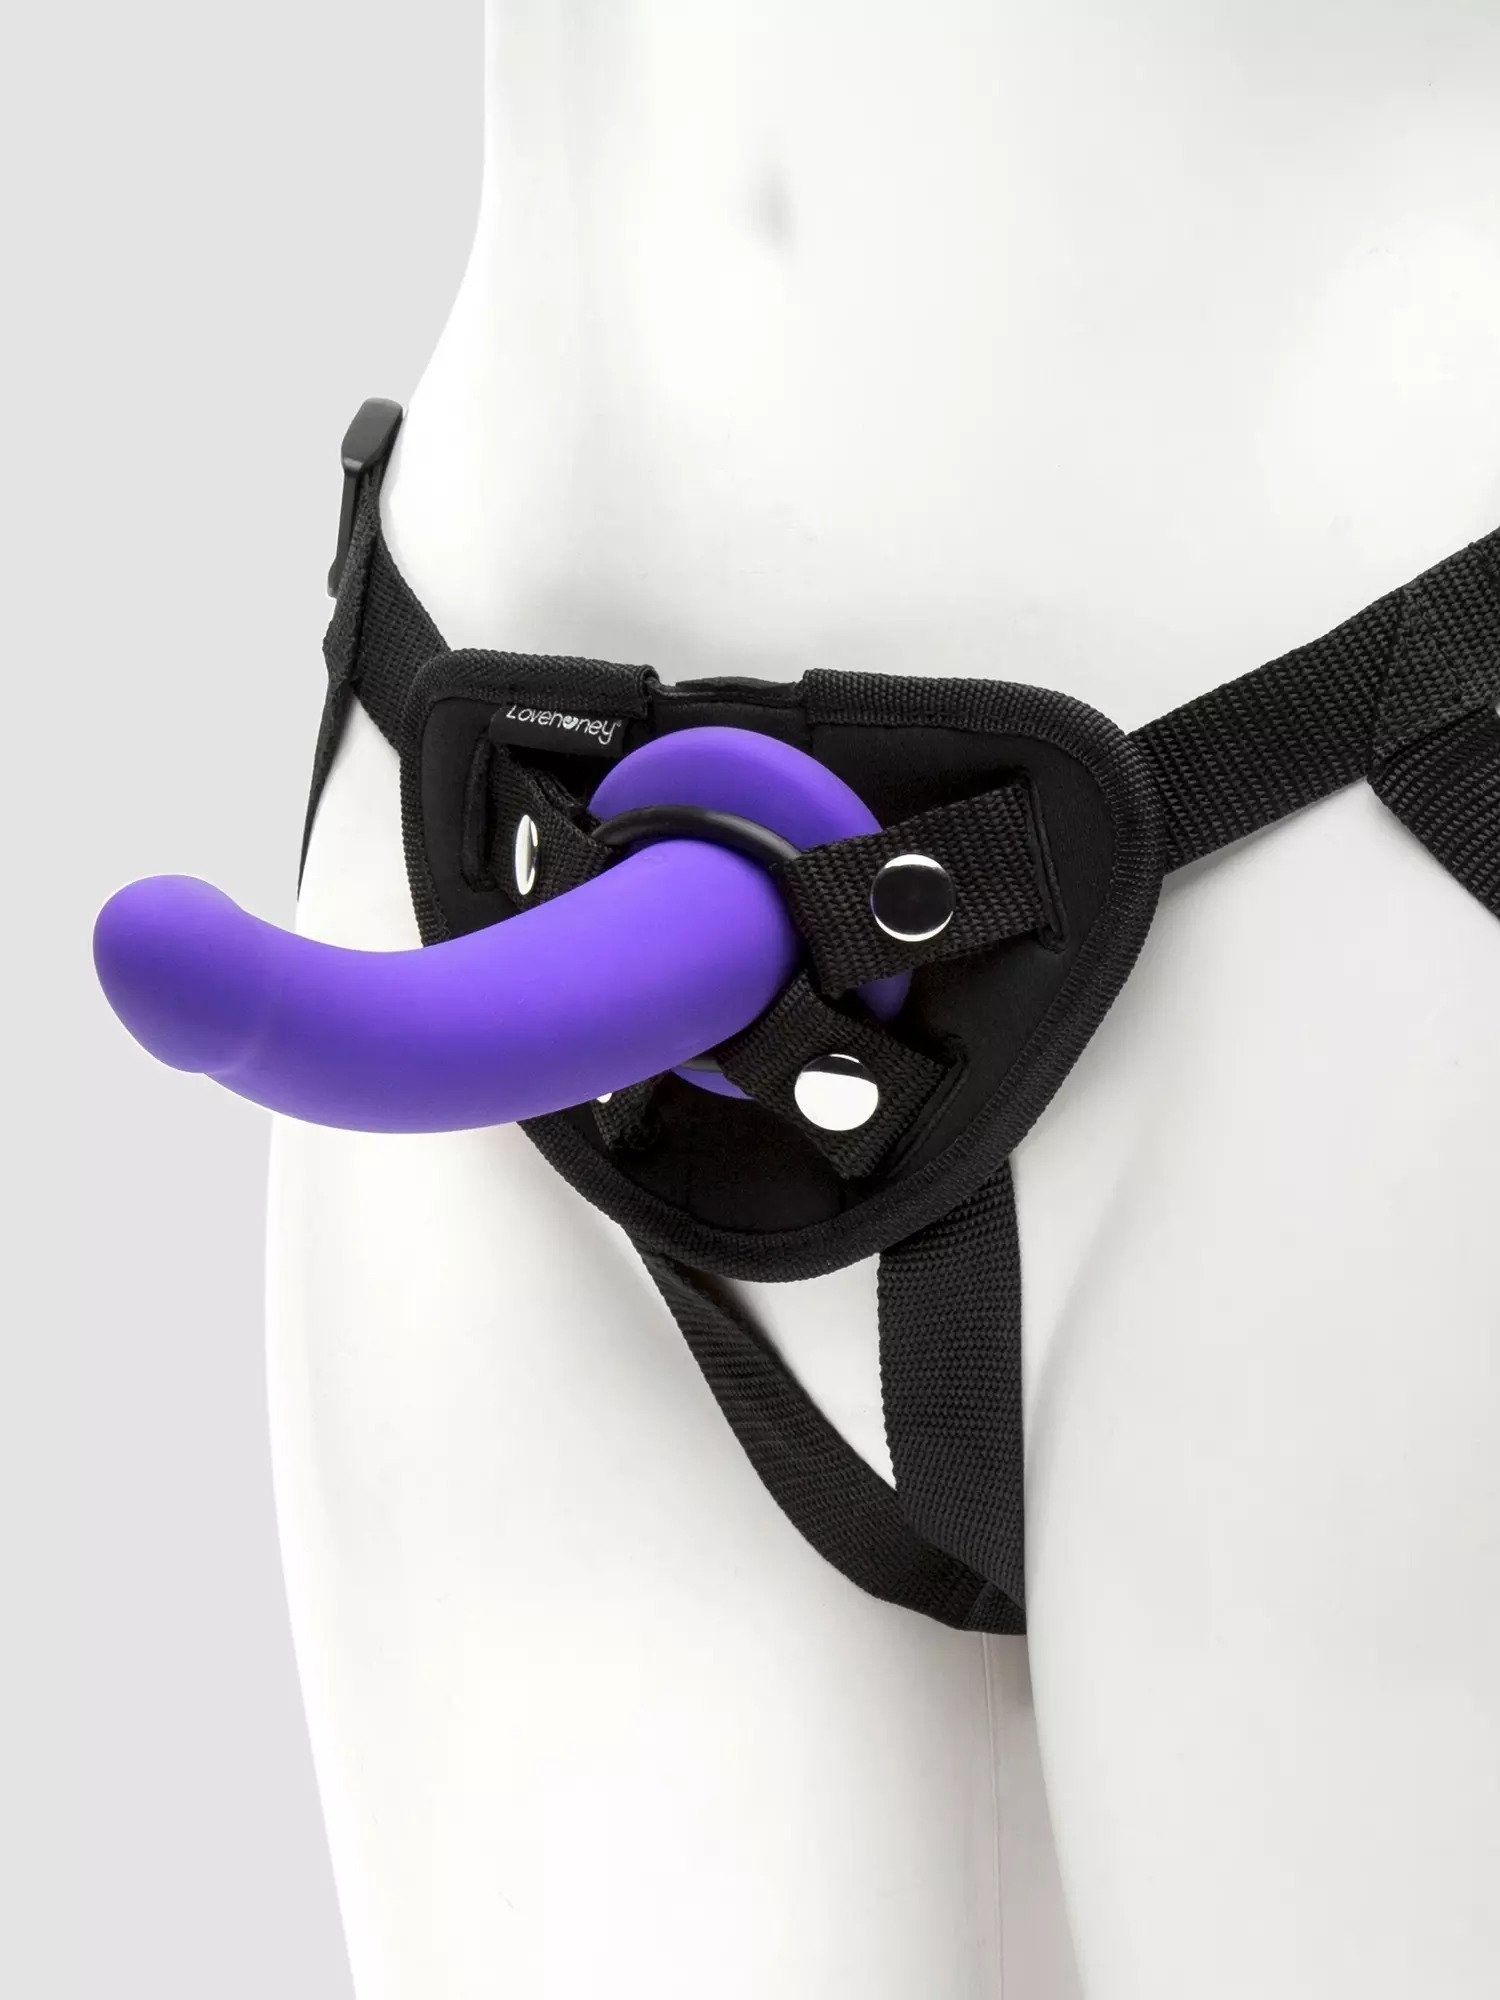 Mannequin wearing black harness with purple dildo